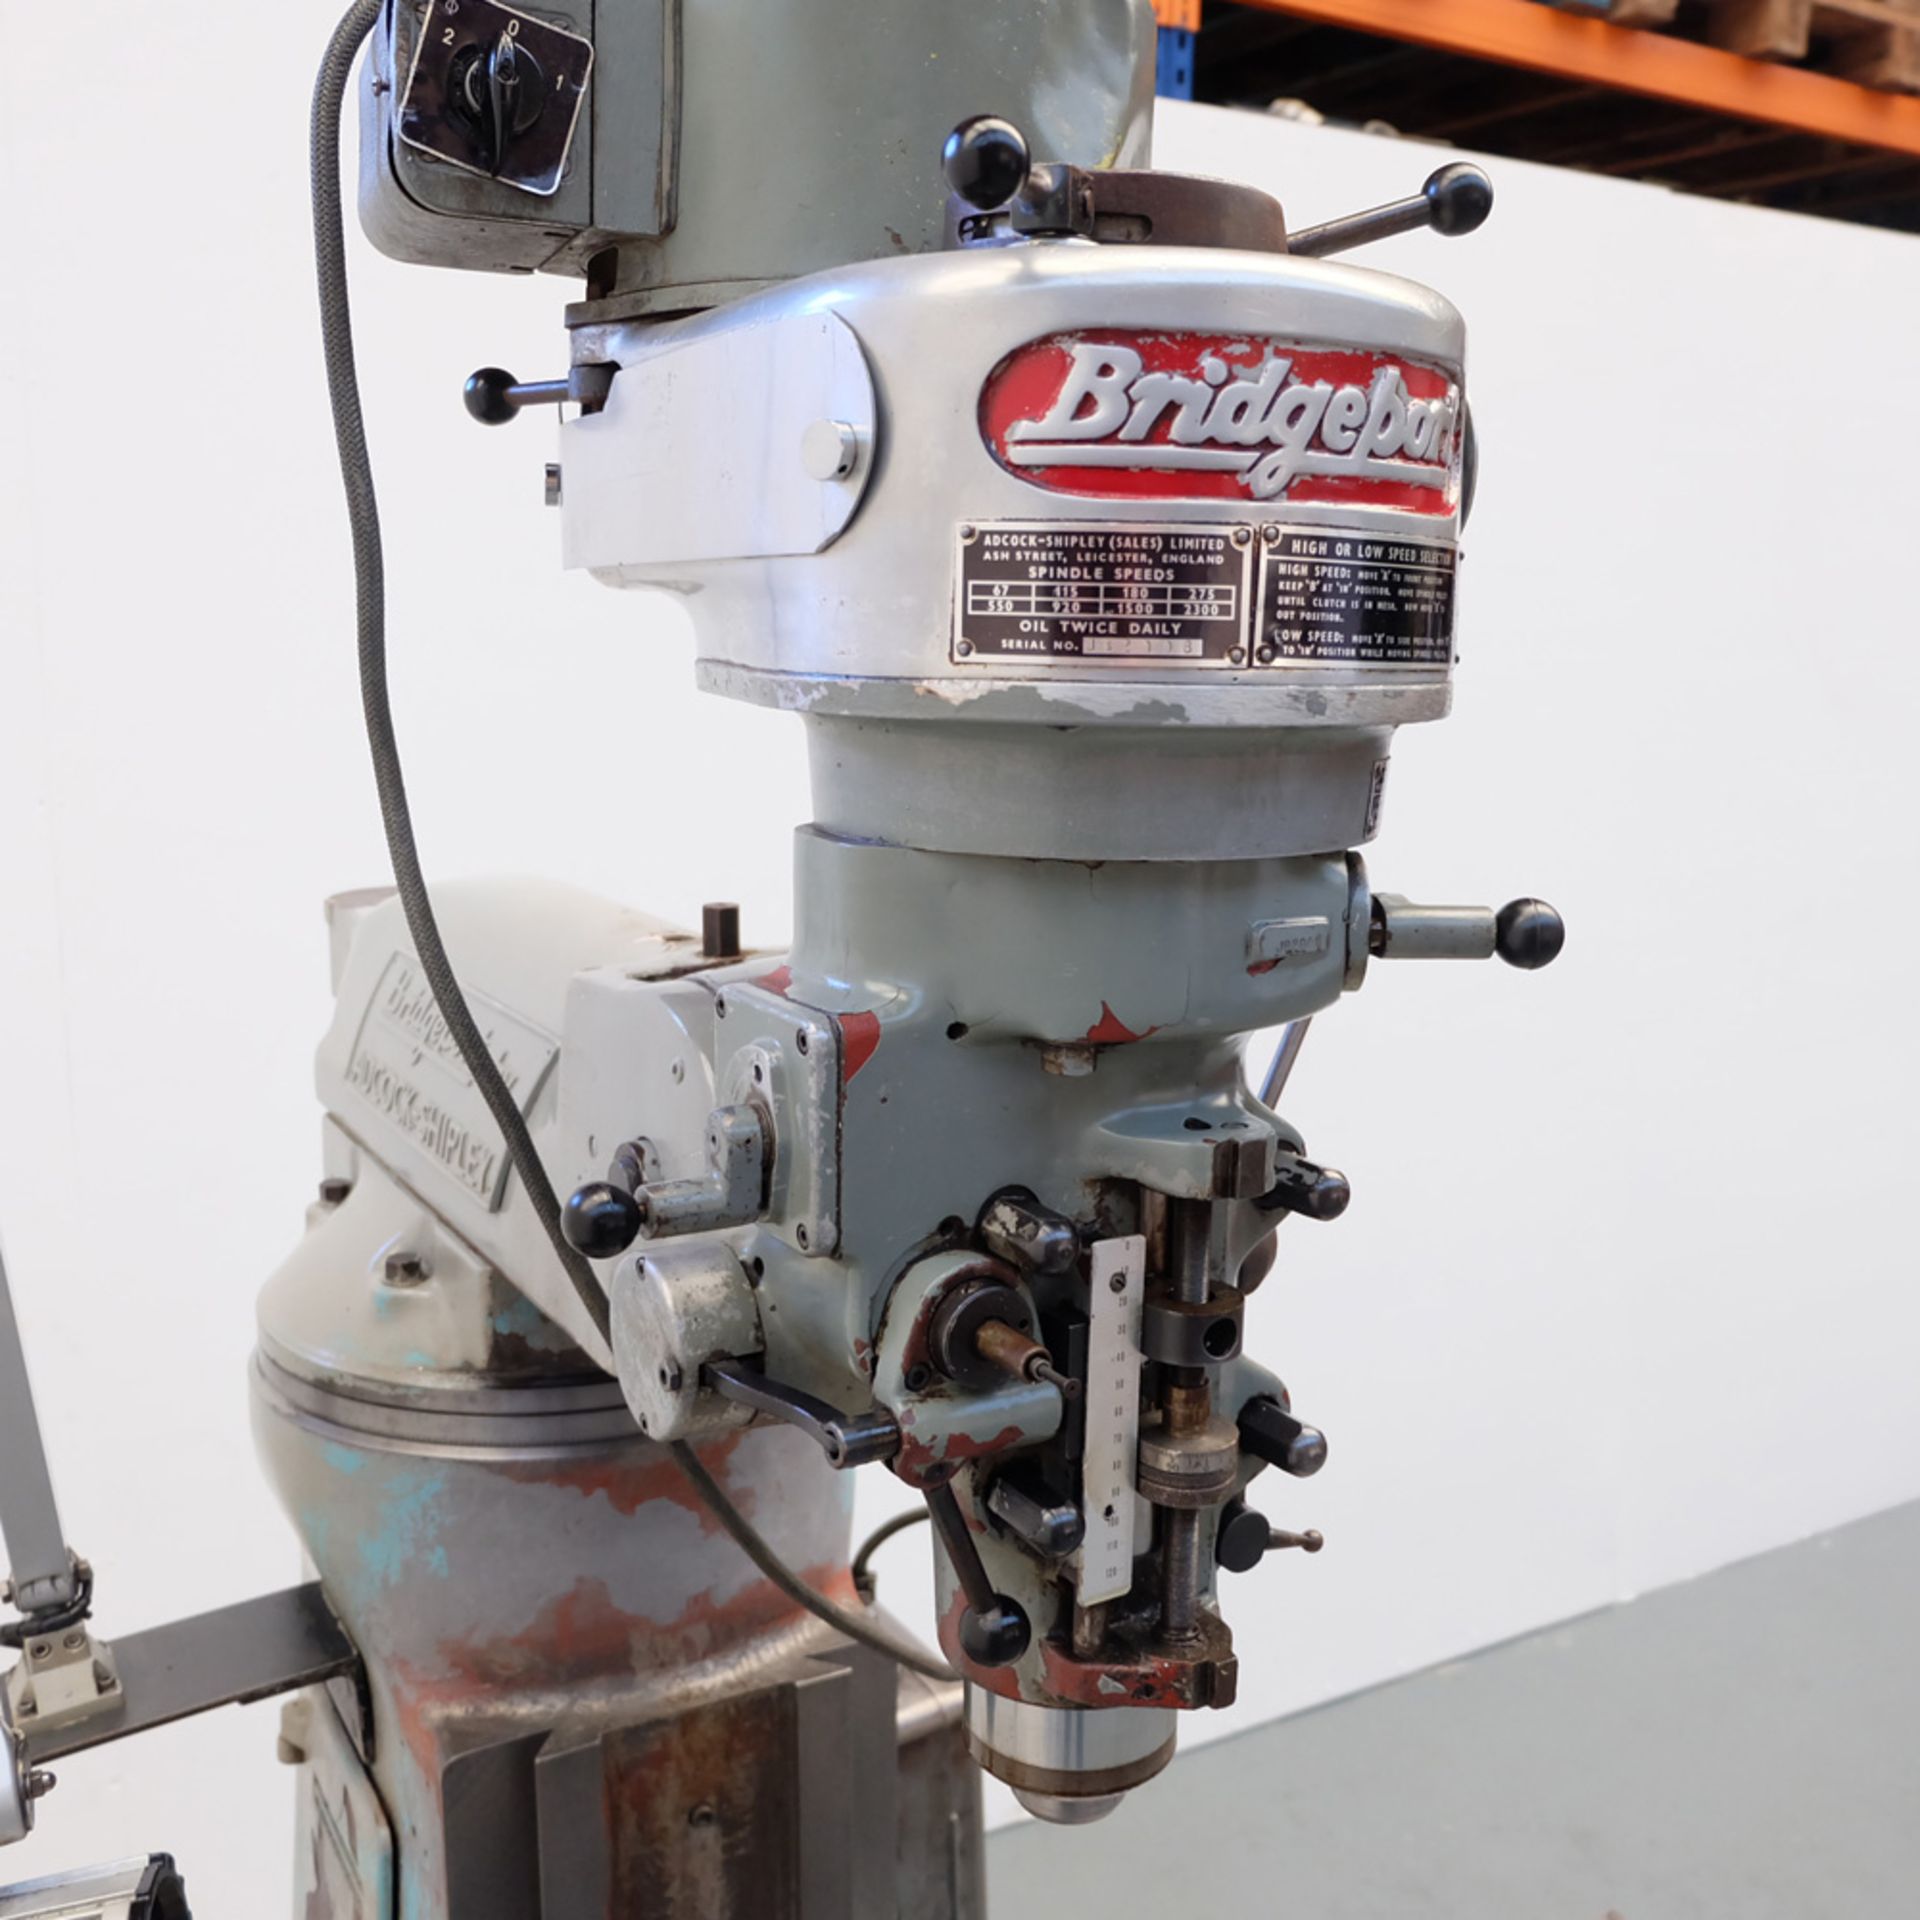 Bridgeport J Type Turret Milling Machine. Table Size 42" x 9". Spindle Taper R8. - Image 3 of 9